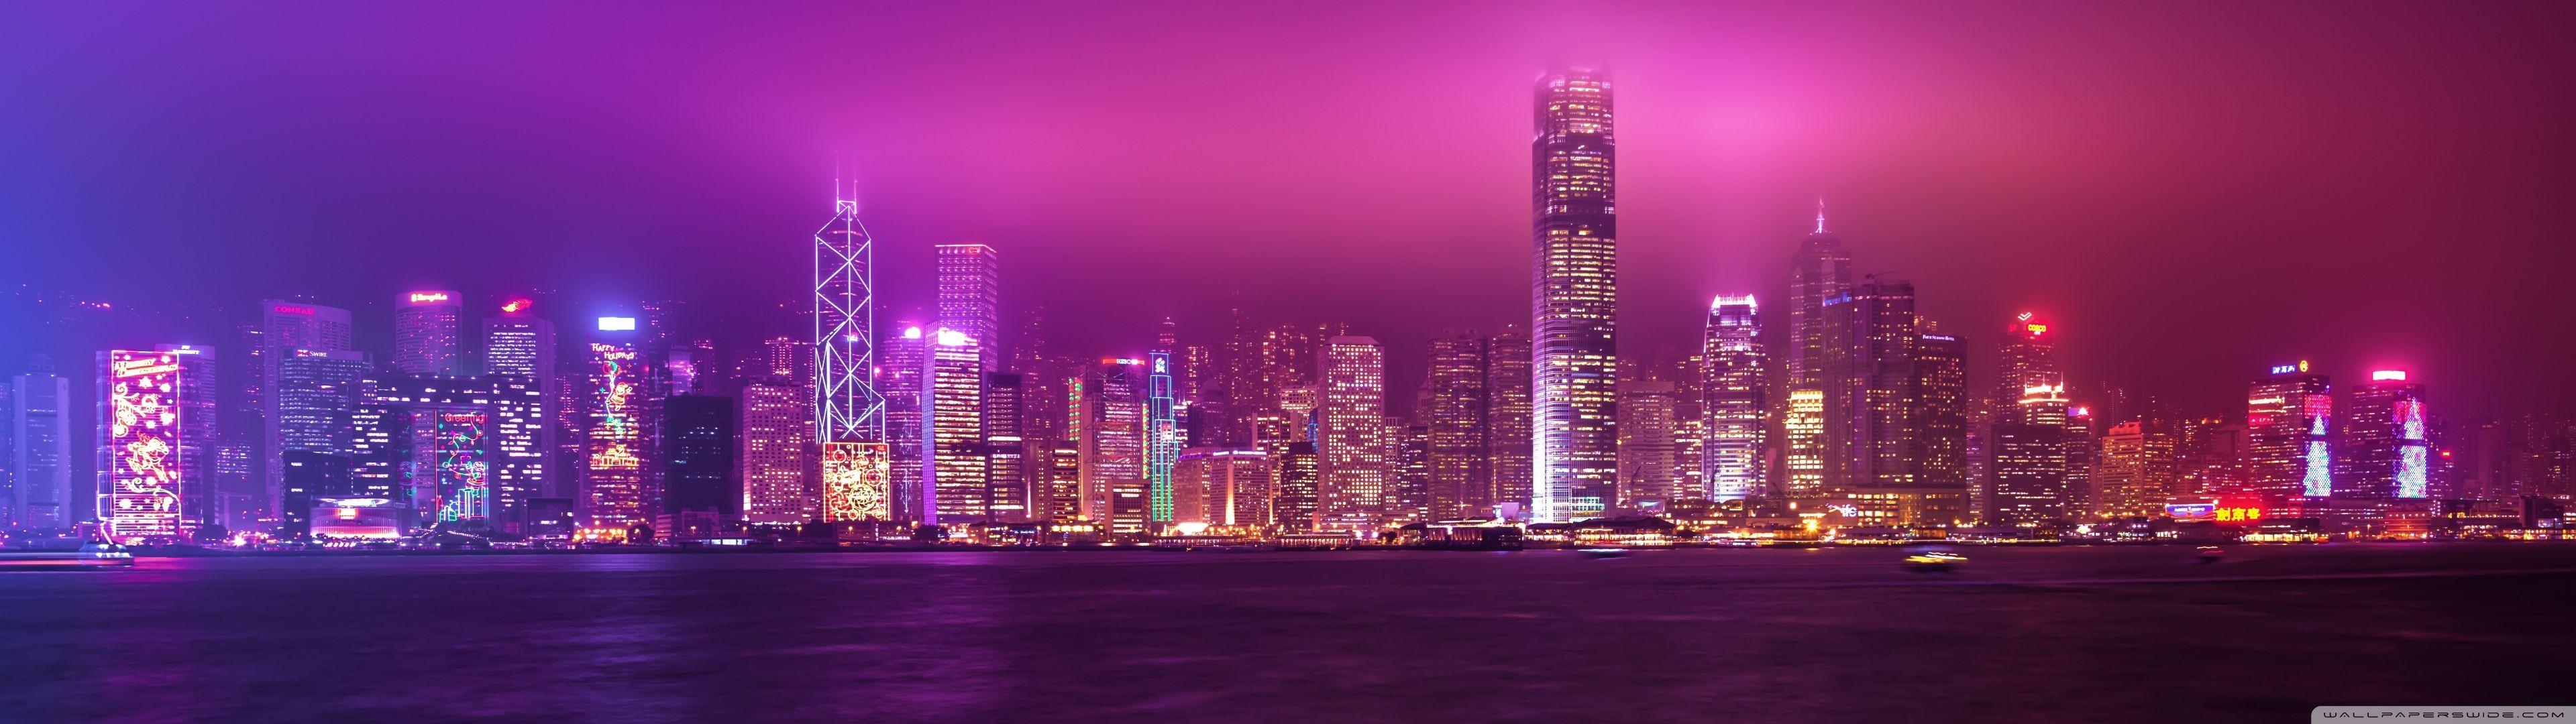 Neon City Wallpaper 3840x1080 We Have 74 Amazing Background Pictures